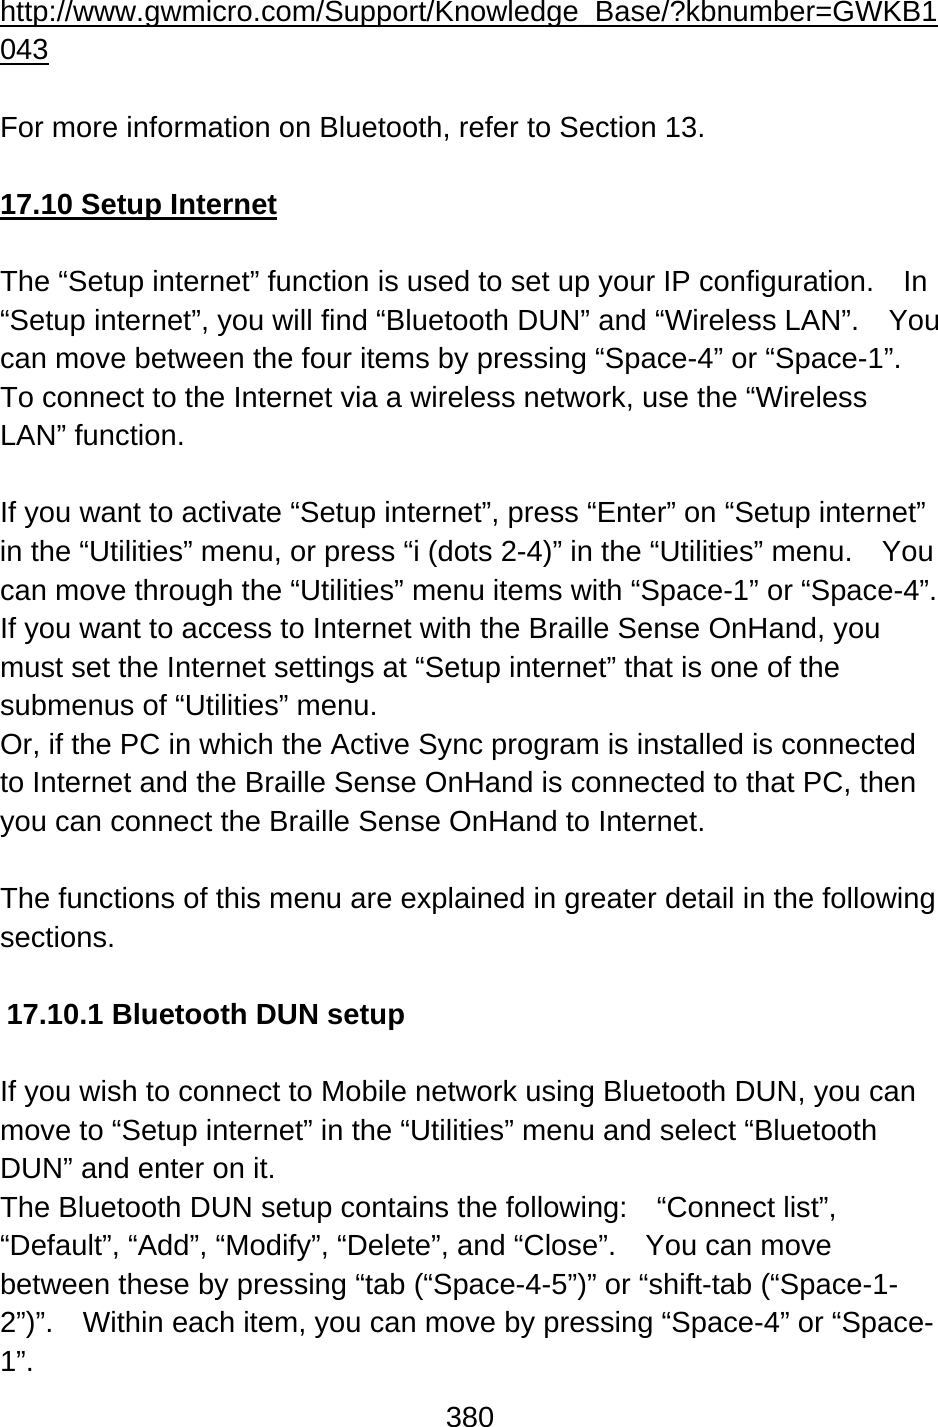 380  http://www.gwmicro.com/Support/Knowledge_Base/?kbnumber=GWKB1043  For more information on Bluetooth, refer to Section 13.  17.10 Setup Internet  The “Setup internet” function is used to set up your IP configuration.    In “Setup internet”, you will find “Bluetooth DUN” and “Wireless LAN”.    You can move between the four items by pressing “Space-4” or “Space-1”. To connect to the Internet via a wireless network, use the “Wireless LAN” function.  If you want to activate “Setup internet”, press “Enter” on “Setup internet” in the “Utilities” menu, or press “i (dots 2-4)” in the “Utilities” menu.    You can move through the “Utilities” menu items with “Space-1” or “Space-4”. If you want to access to Internet with the Braille Sense OnHand, you must set the Internet settings at “Setup internet” that is one of the submenus of “Utilities” menu. Or, if the PC in which the Active Sync program is installed is connected to Internet and the Braille Sense OnHand is connected to that PC, then you can connect the Braille Sense OnHand to Internet.  The functions of this menu are explained in greater detail in the following sections.  17.10.1 Bluetooth DUN setup  If you wish to connect to Mobile network using Bluetooth DUN, you can move to “Setup internet” in the “Utilities” menu and select “Bluetooth DUN” and enter on it.   The Bluetooth DUN setup contains the following:  “Connect list”, “Default”, “Add”, “Modify”, “Delete”, and “Close”.    You can move between these by pressing “tab (“Space-4-5”)” or “shift-tab (“Space-1-2”)”.    Within each item, you can move by pressing “Space-4” or “Space-1”. 